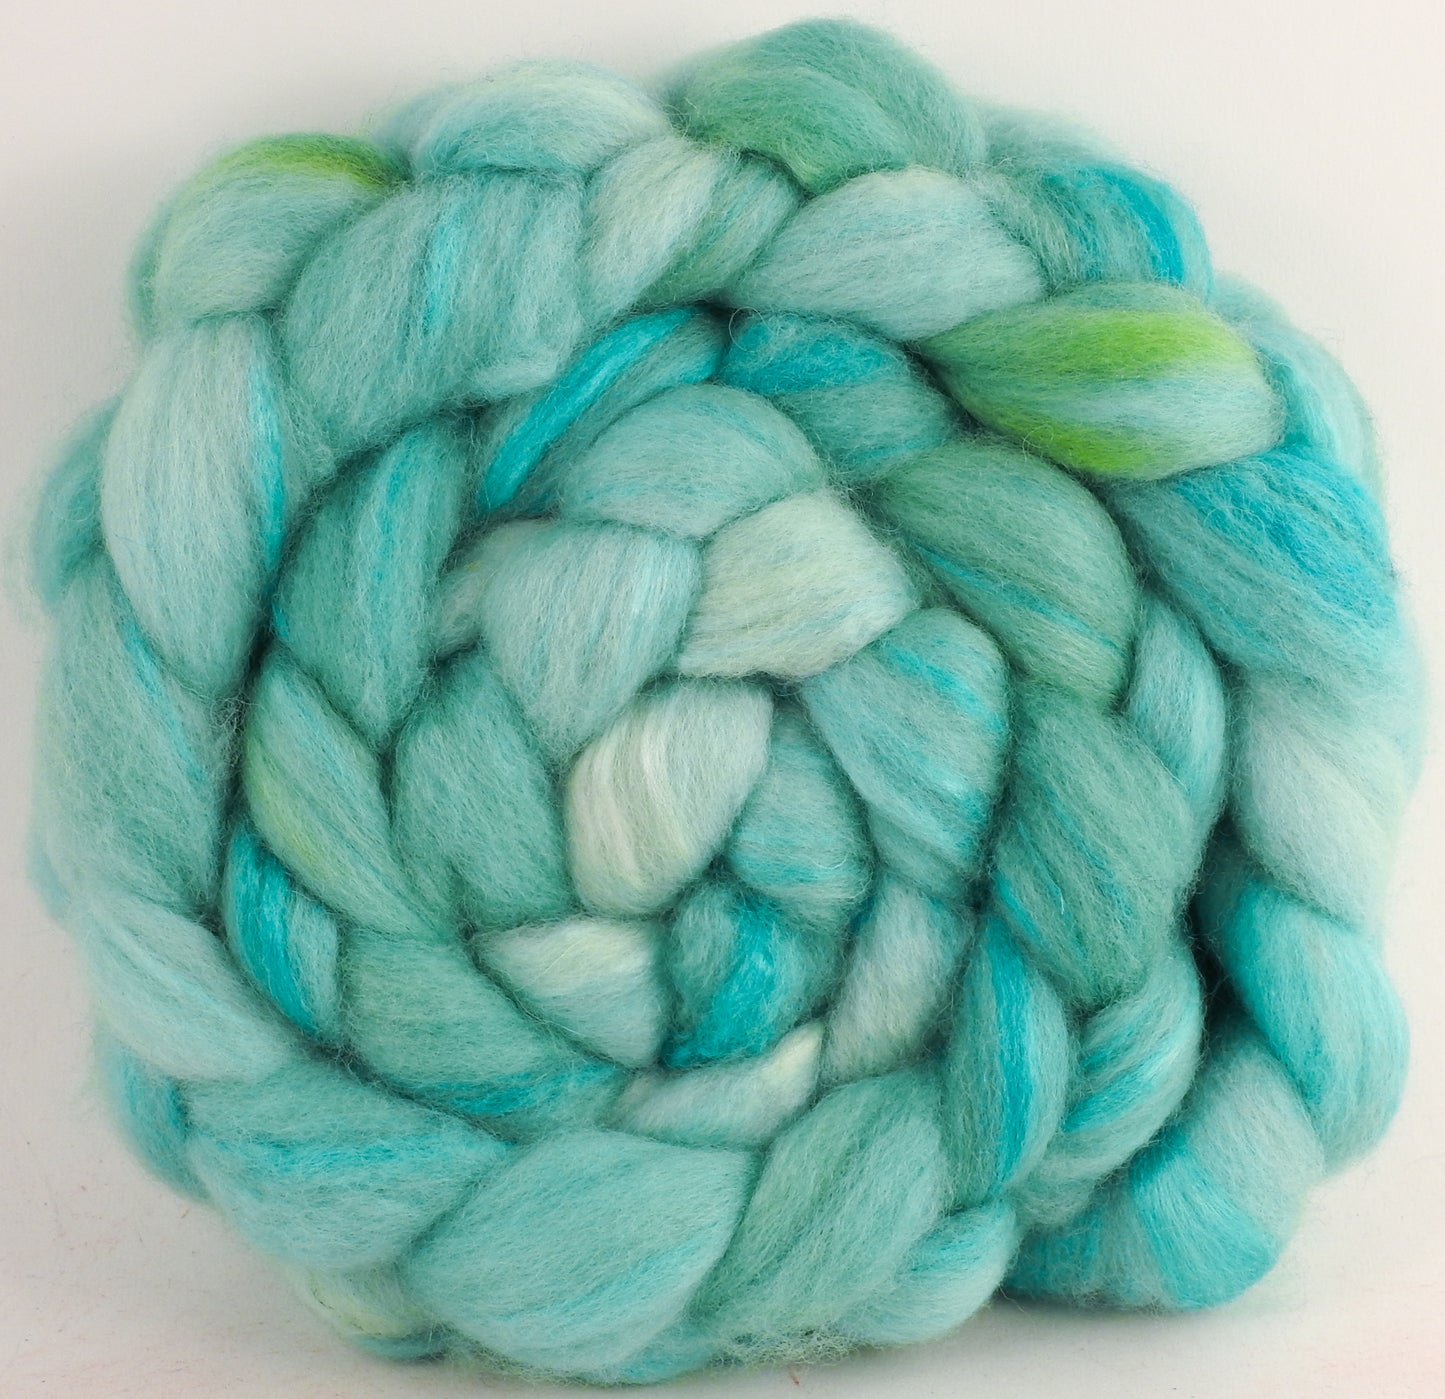 Blue-faced Leicester/ Tussah Silk (70/30) - Waterfall